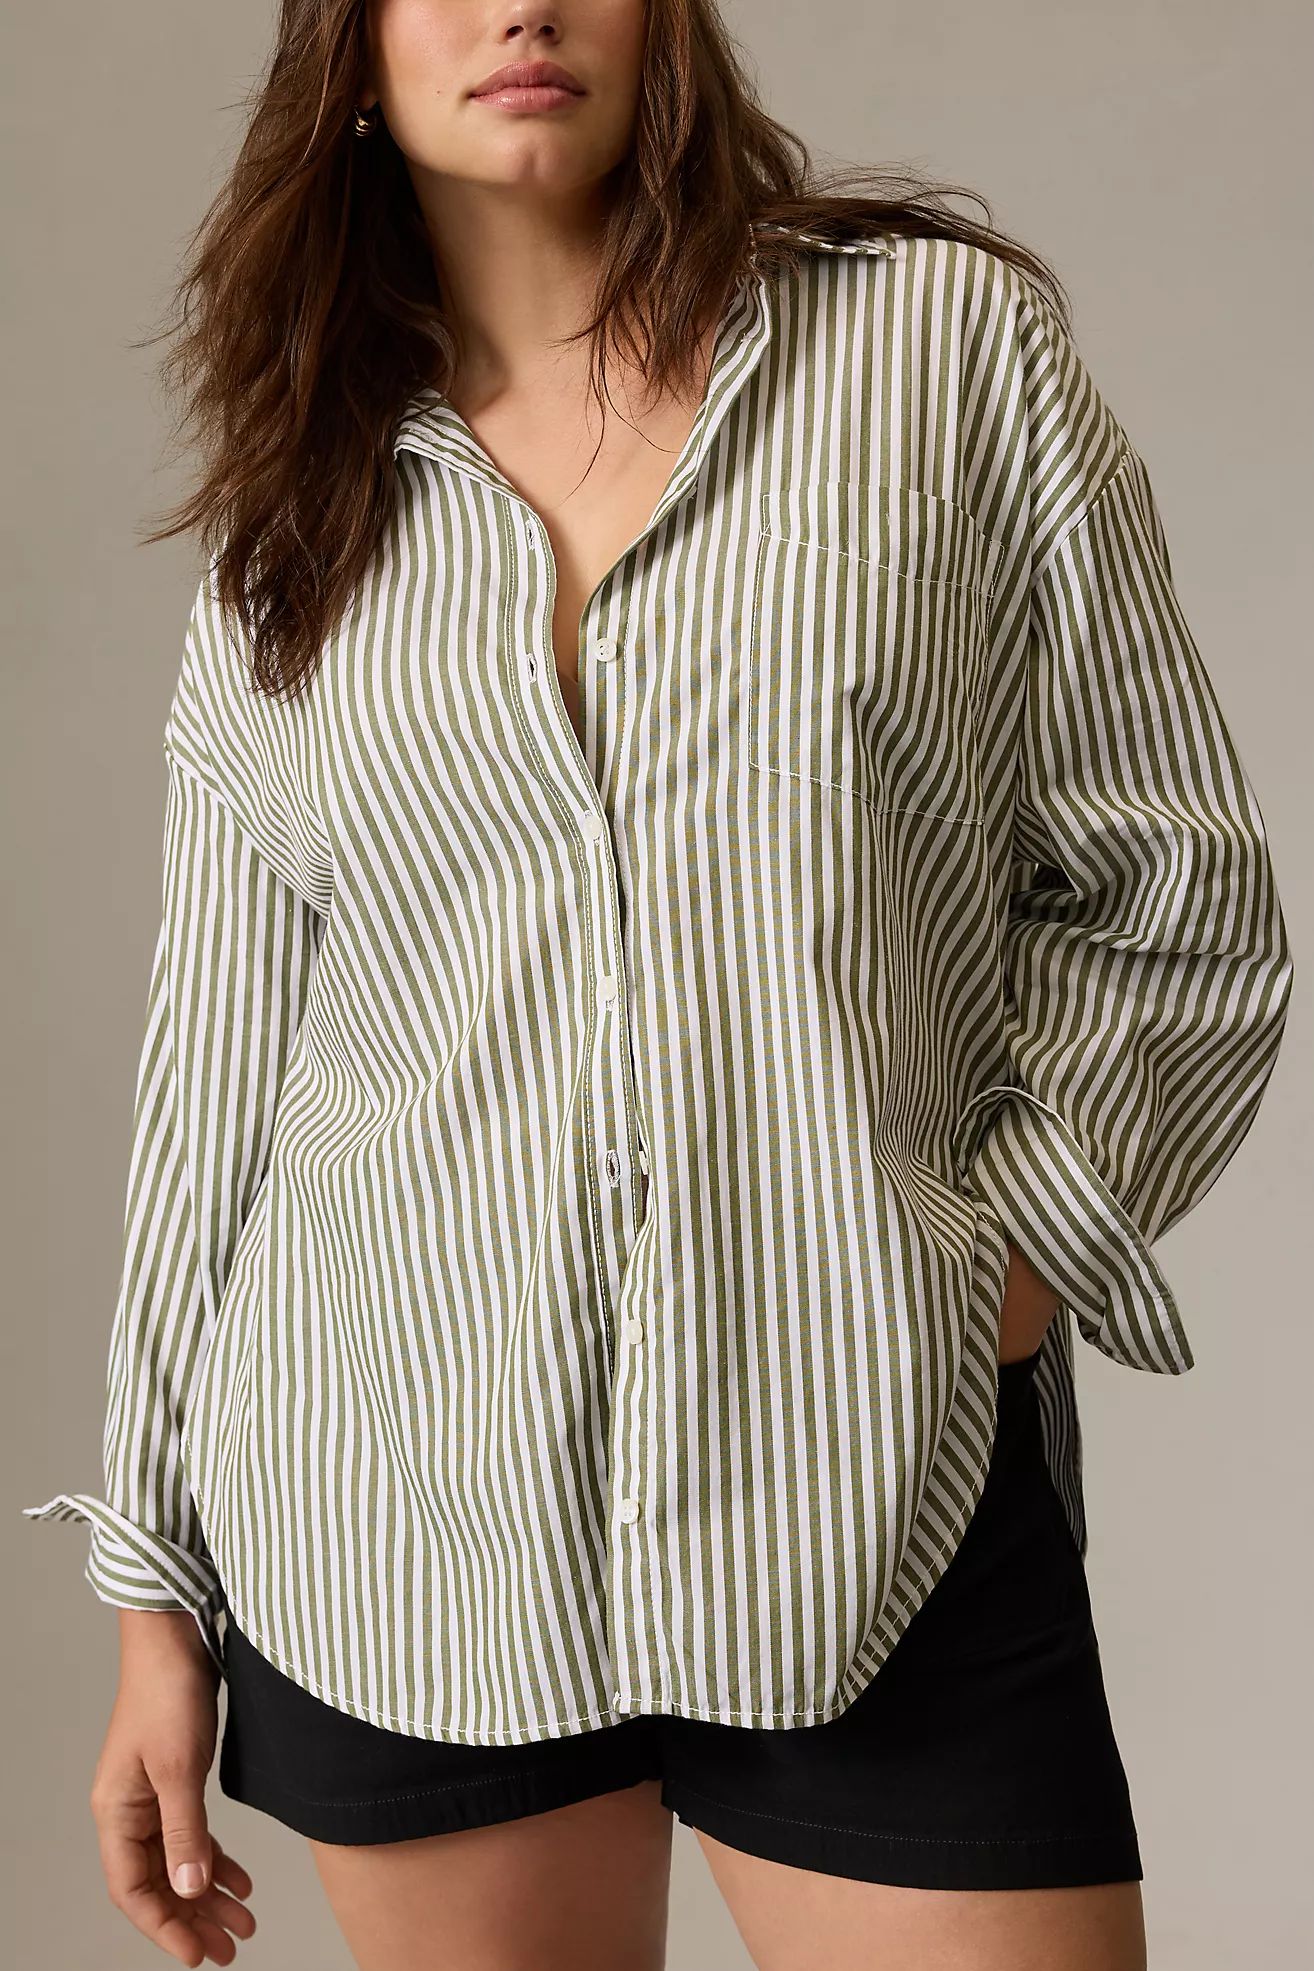 The Bennet Buttondown Shirt by Maeve: Striped Edition | Anthropologie (US)